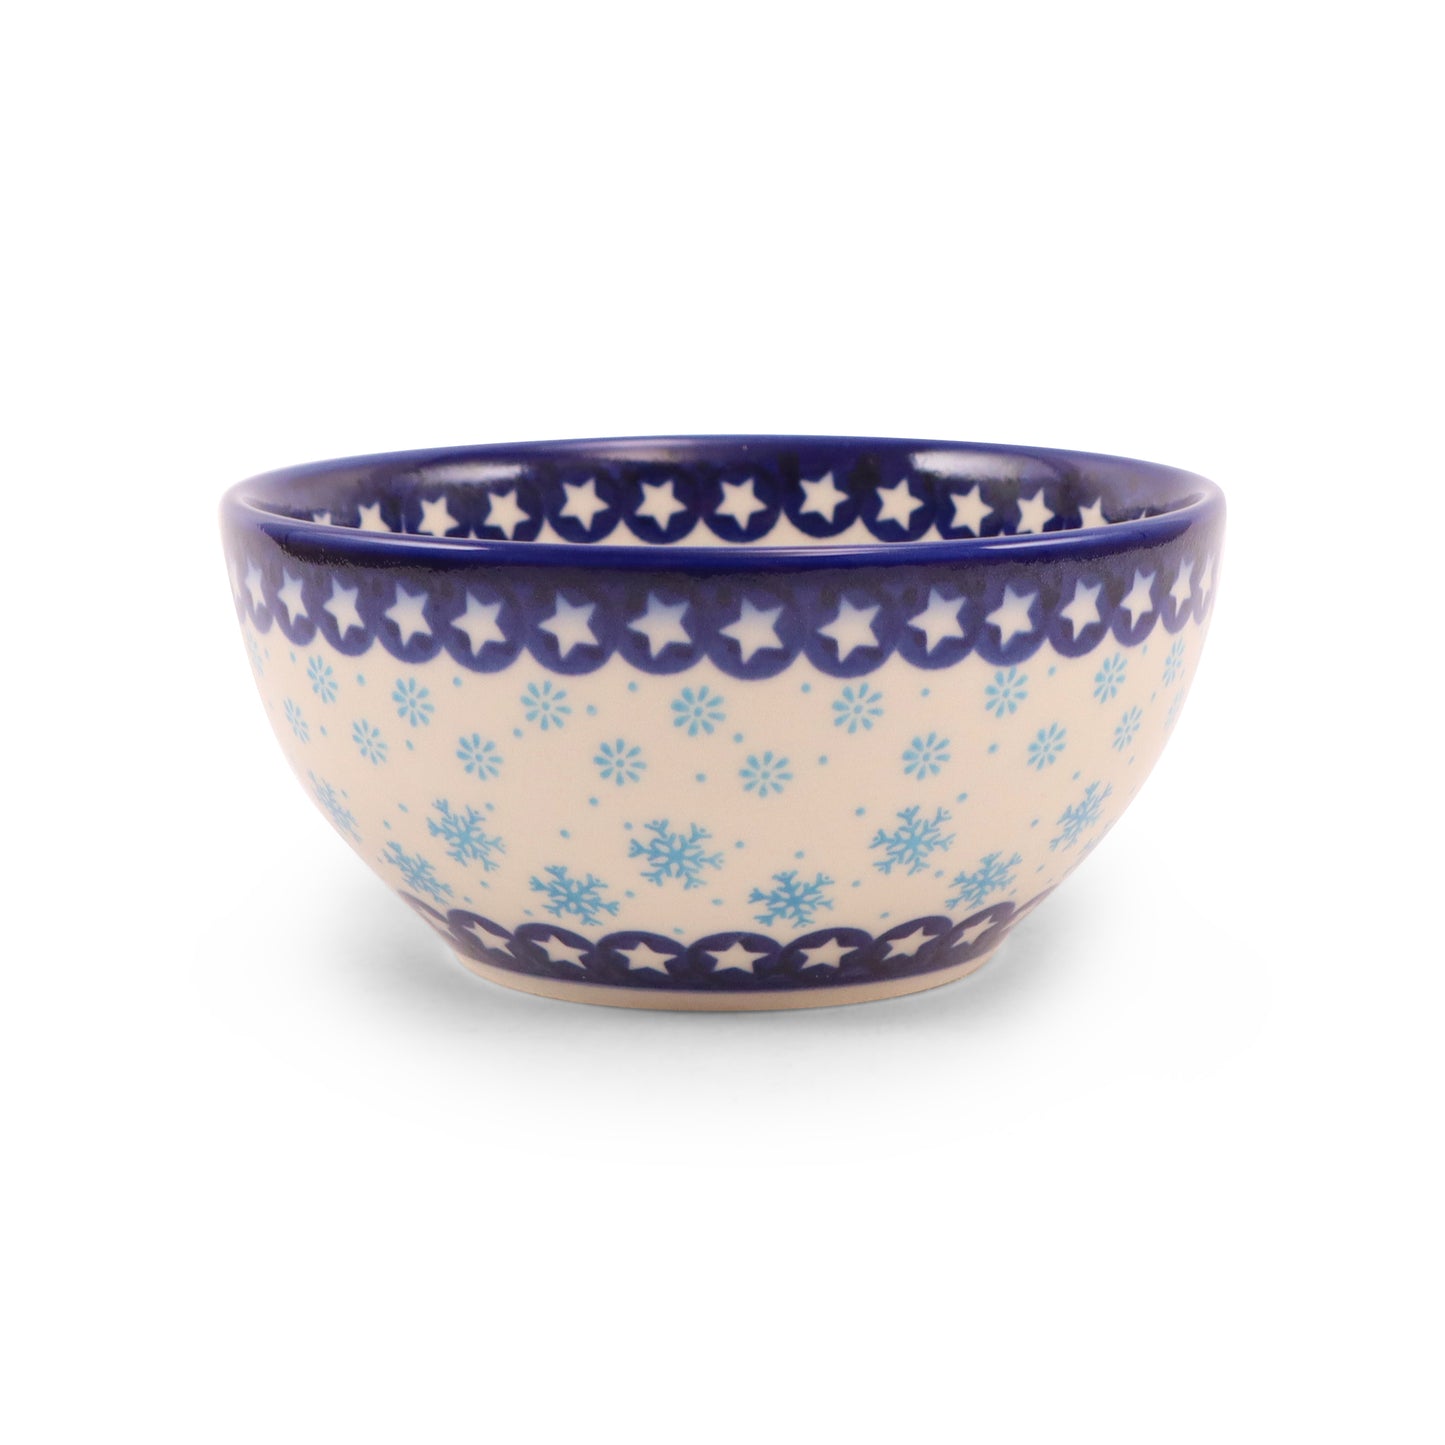 6" Cereal Bowl. Pattern: Frosted Flakes